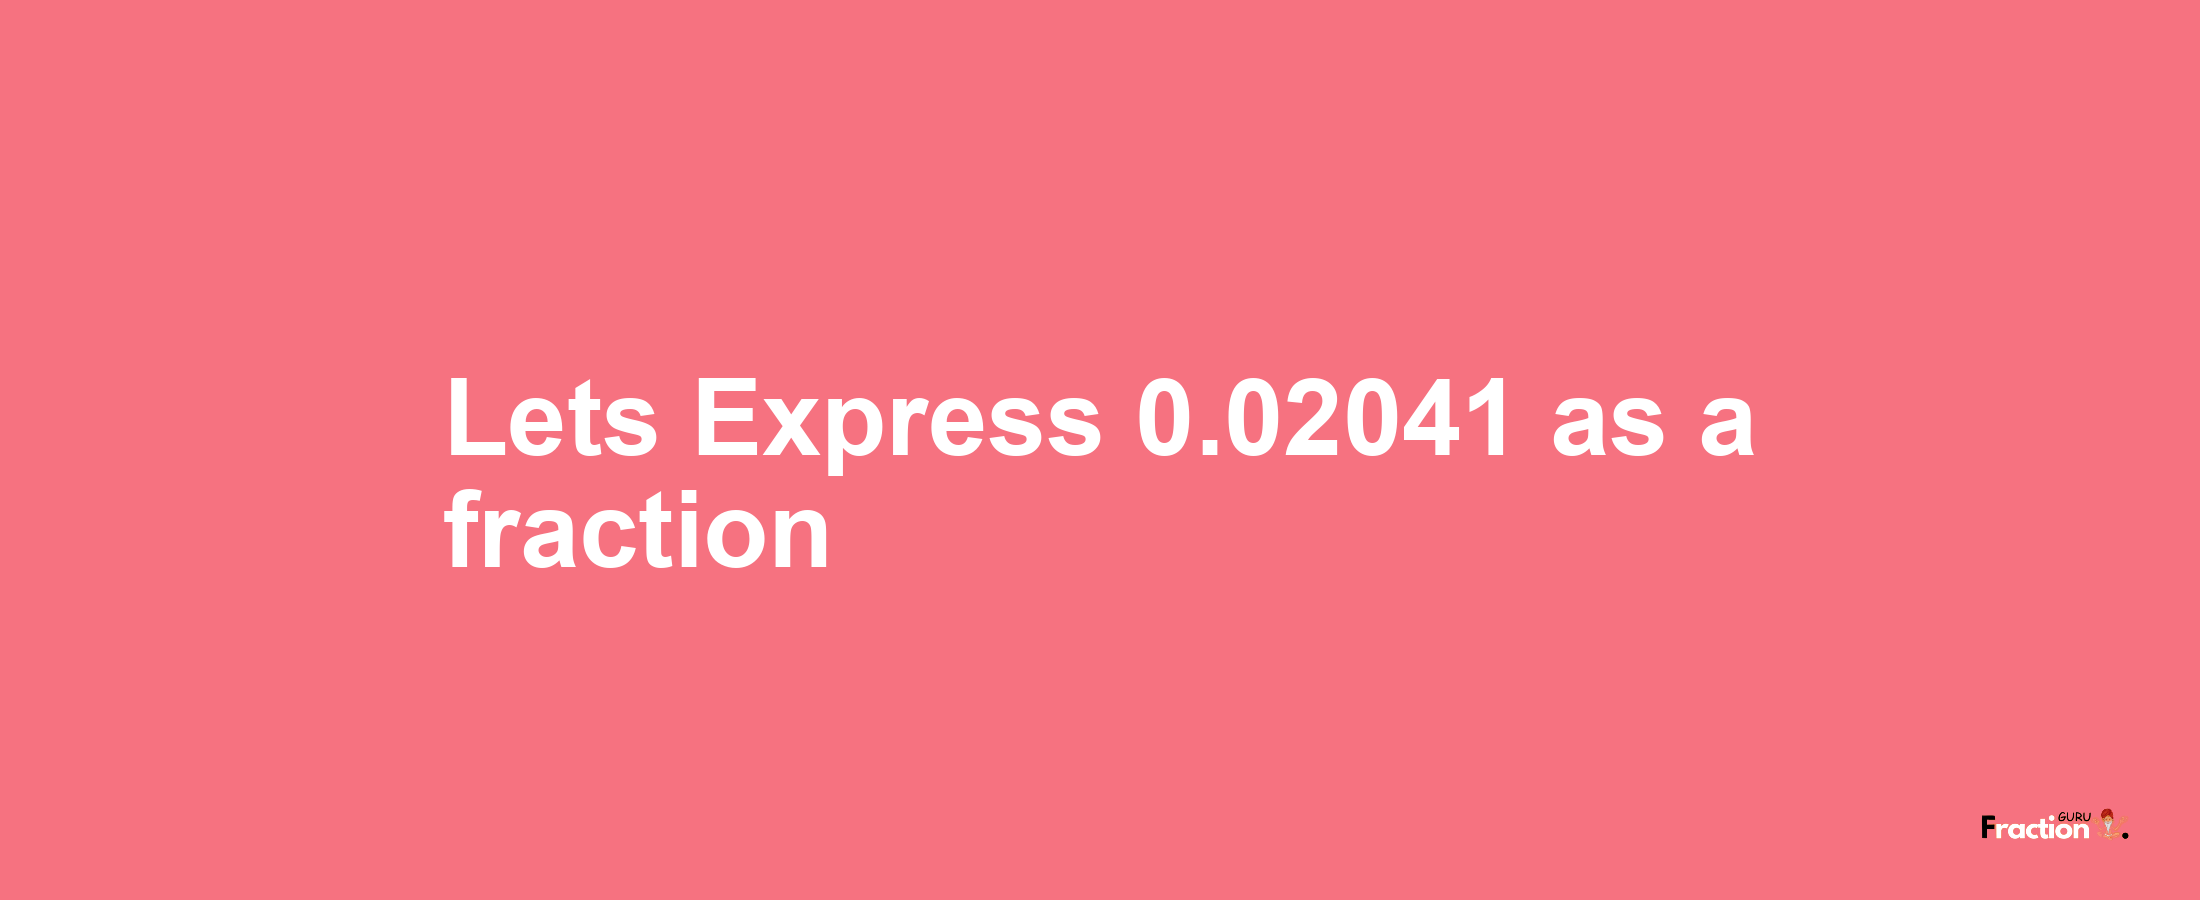 Lets Express 0.02041 as afraction